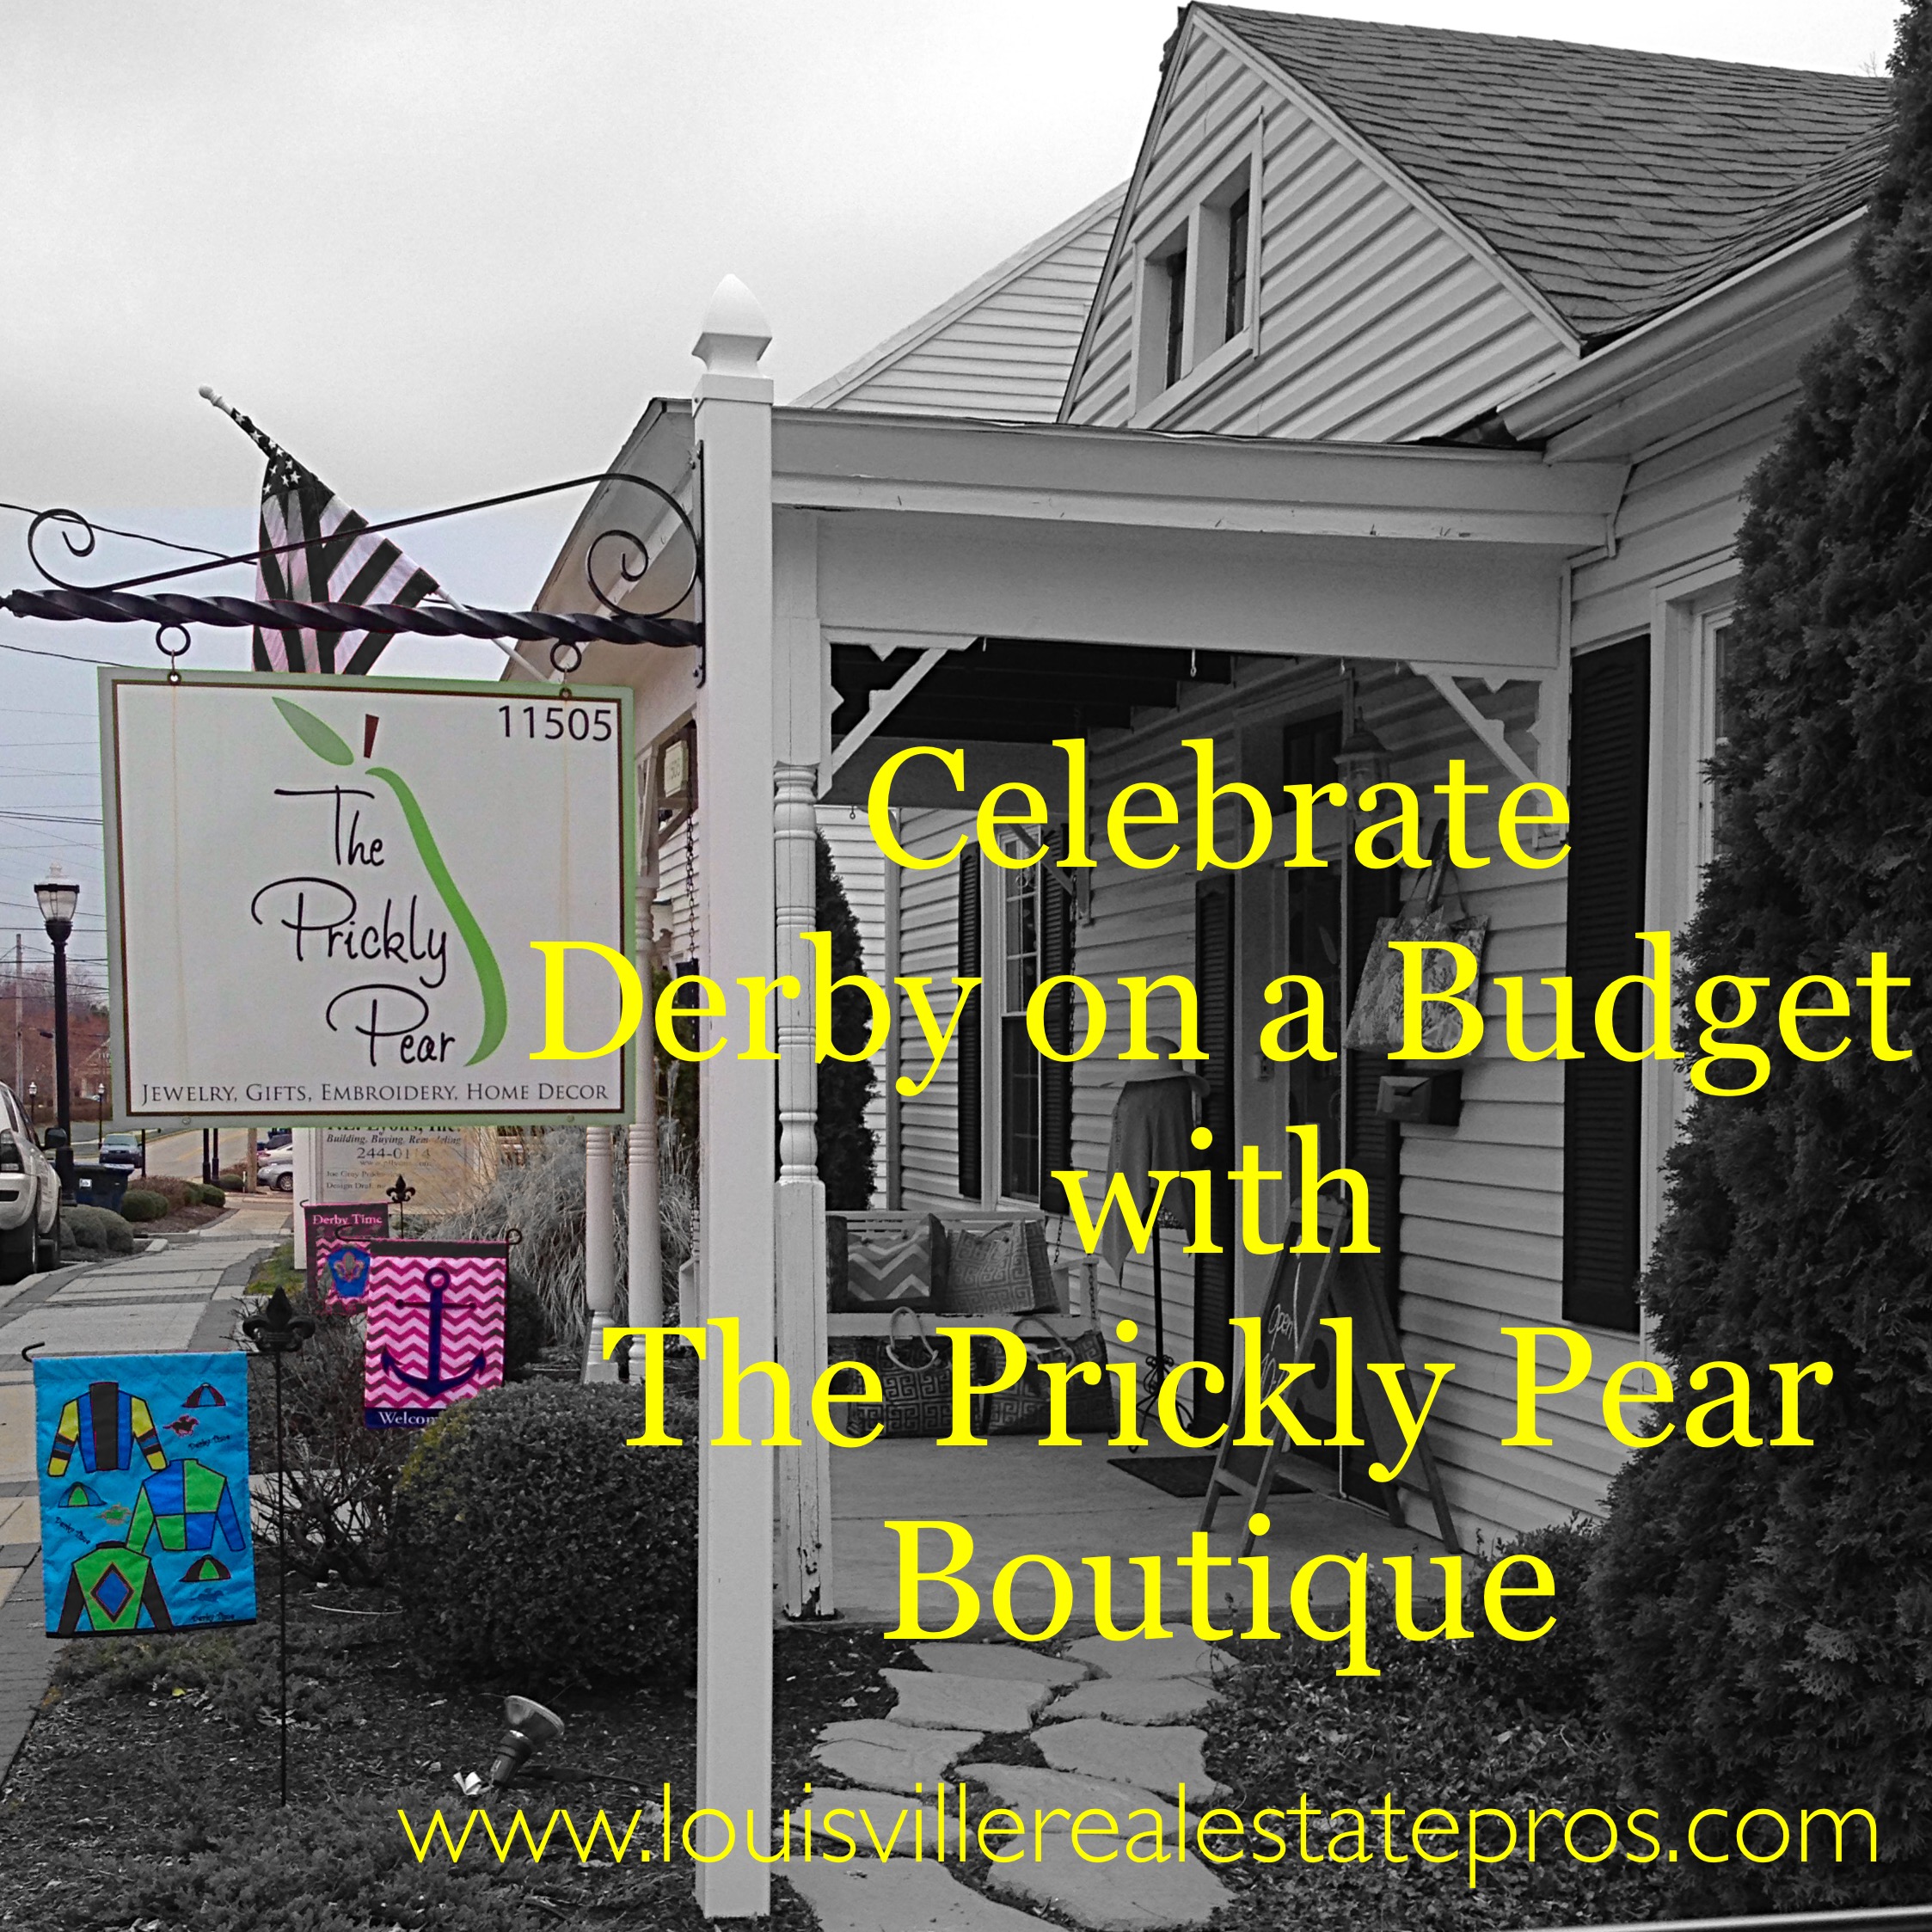 Celebrate Derby on a Budget with The Prickly Pear Boutique